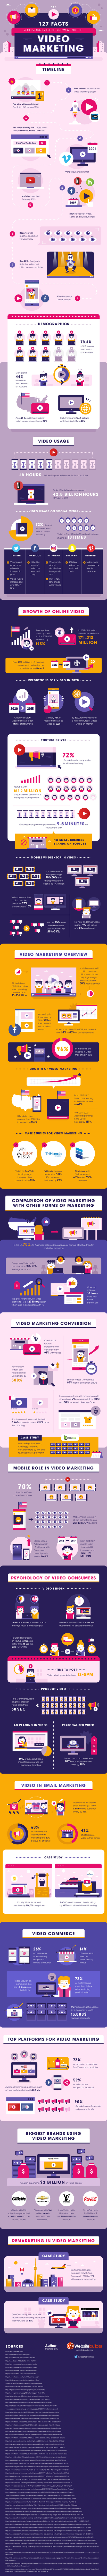 127 Facts About Video Marketing